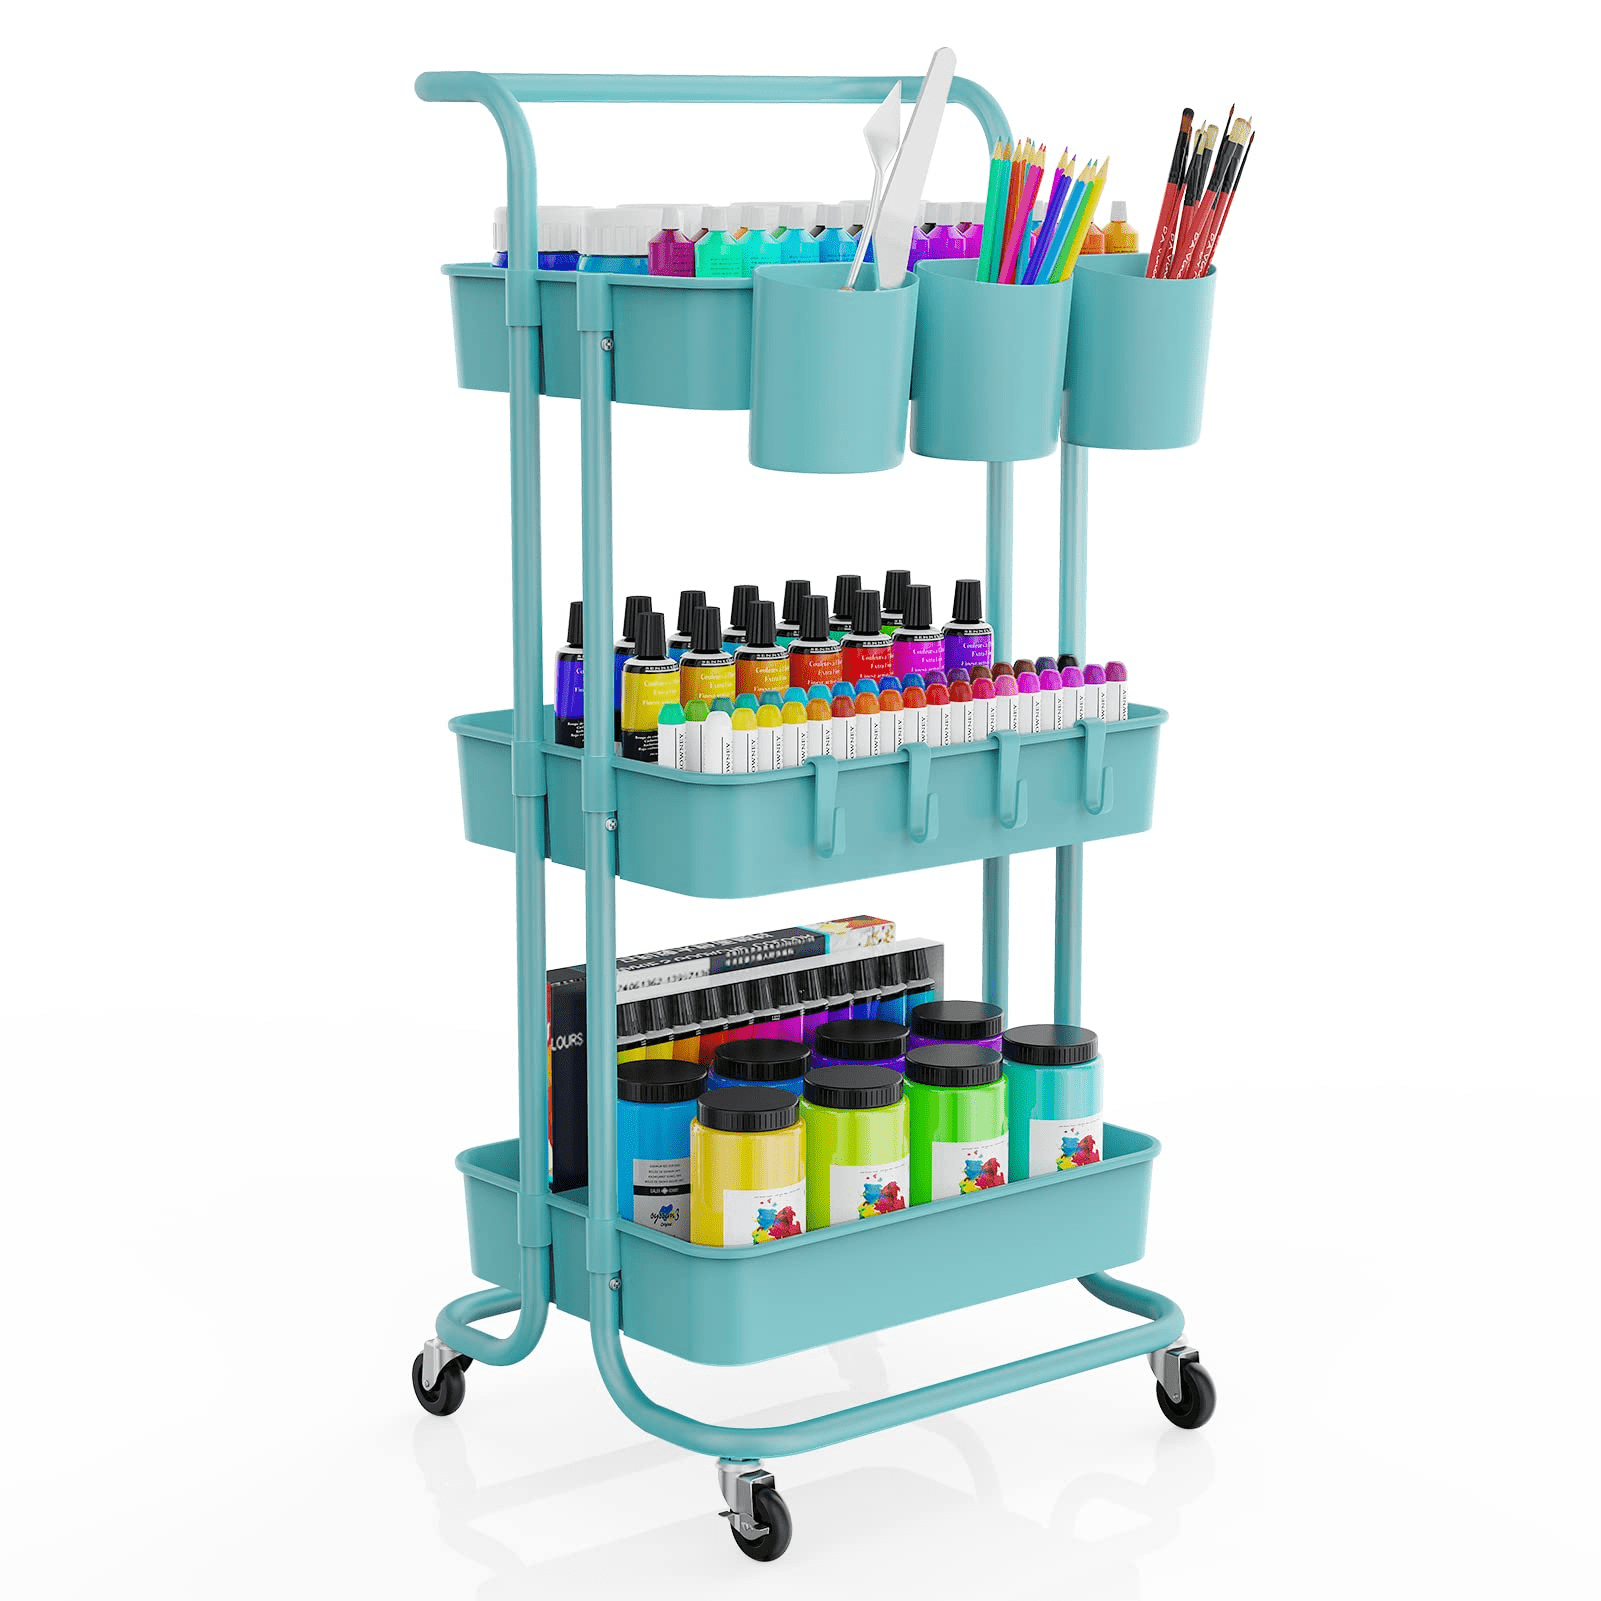  3-Tier Mobile Serving Cart, Foldable Storage Cart on Wheels,  Kitchen Storage Rolling Cart, Multifunctional Kitchen Island Utility Cart  Organizer for Kitchen, Laundry Room, Bathroom, Bedroom : Home & Kitchen